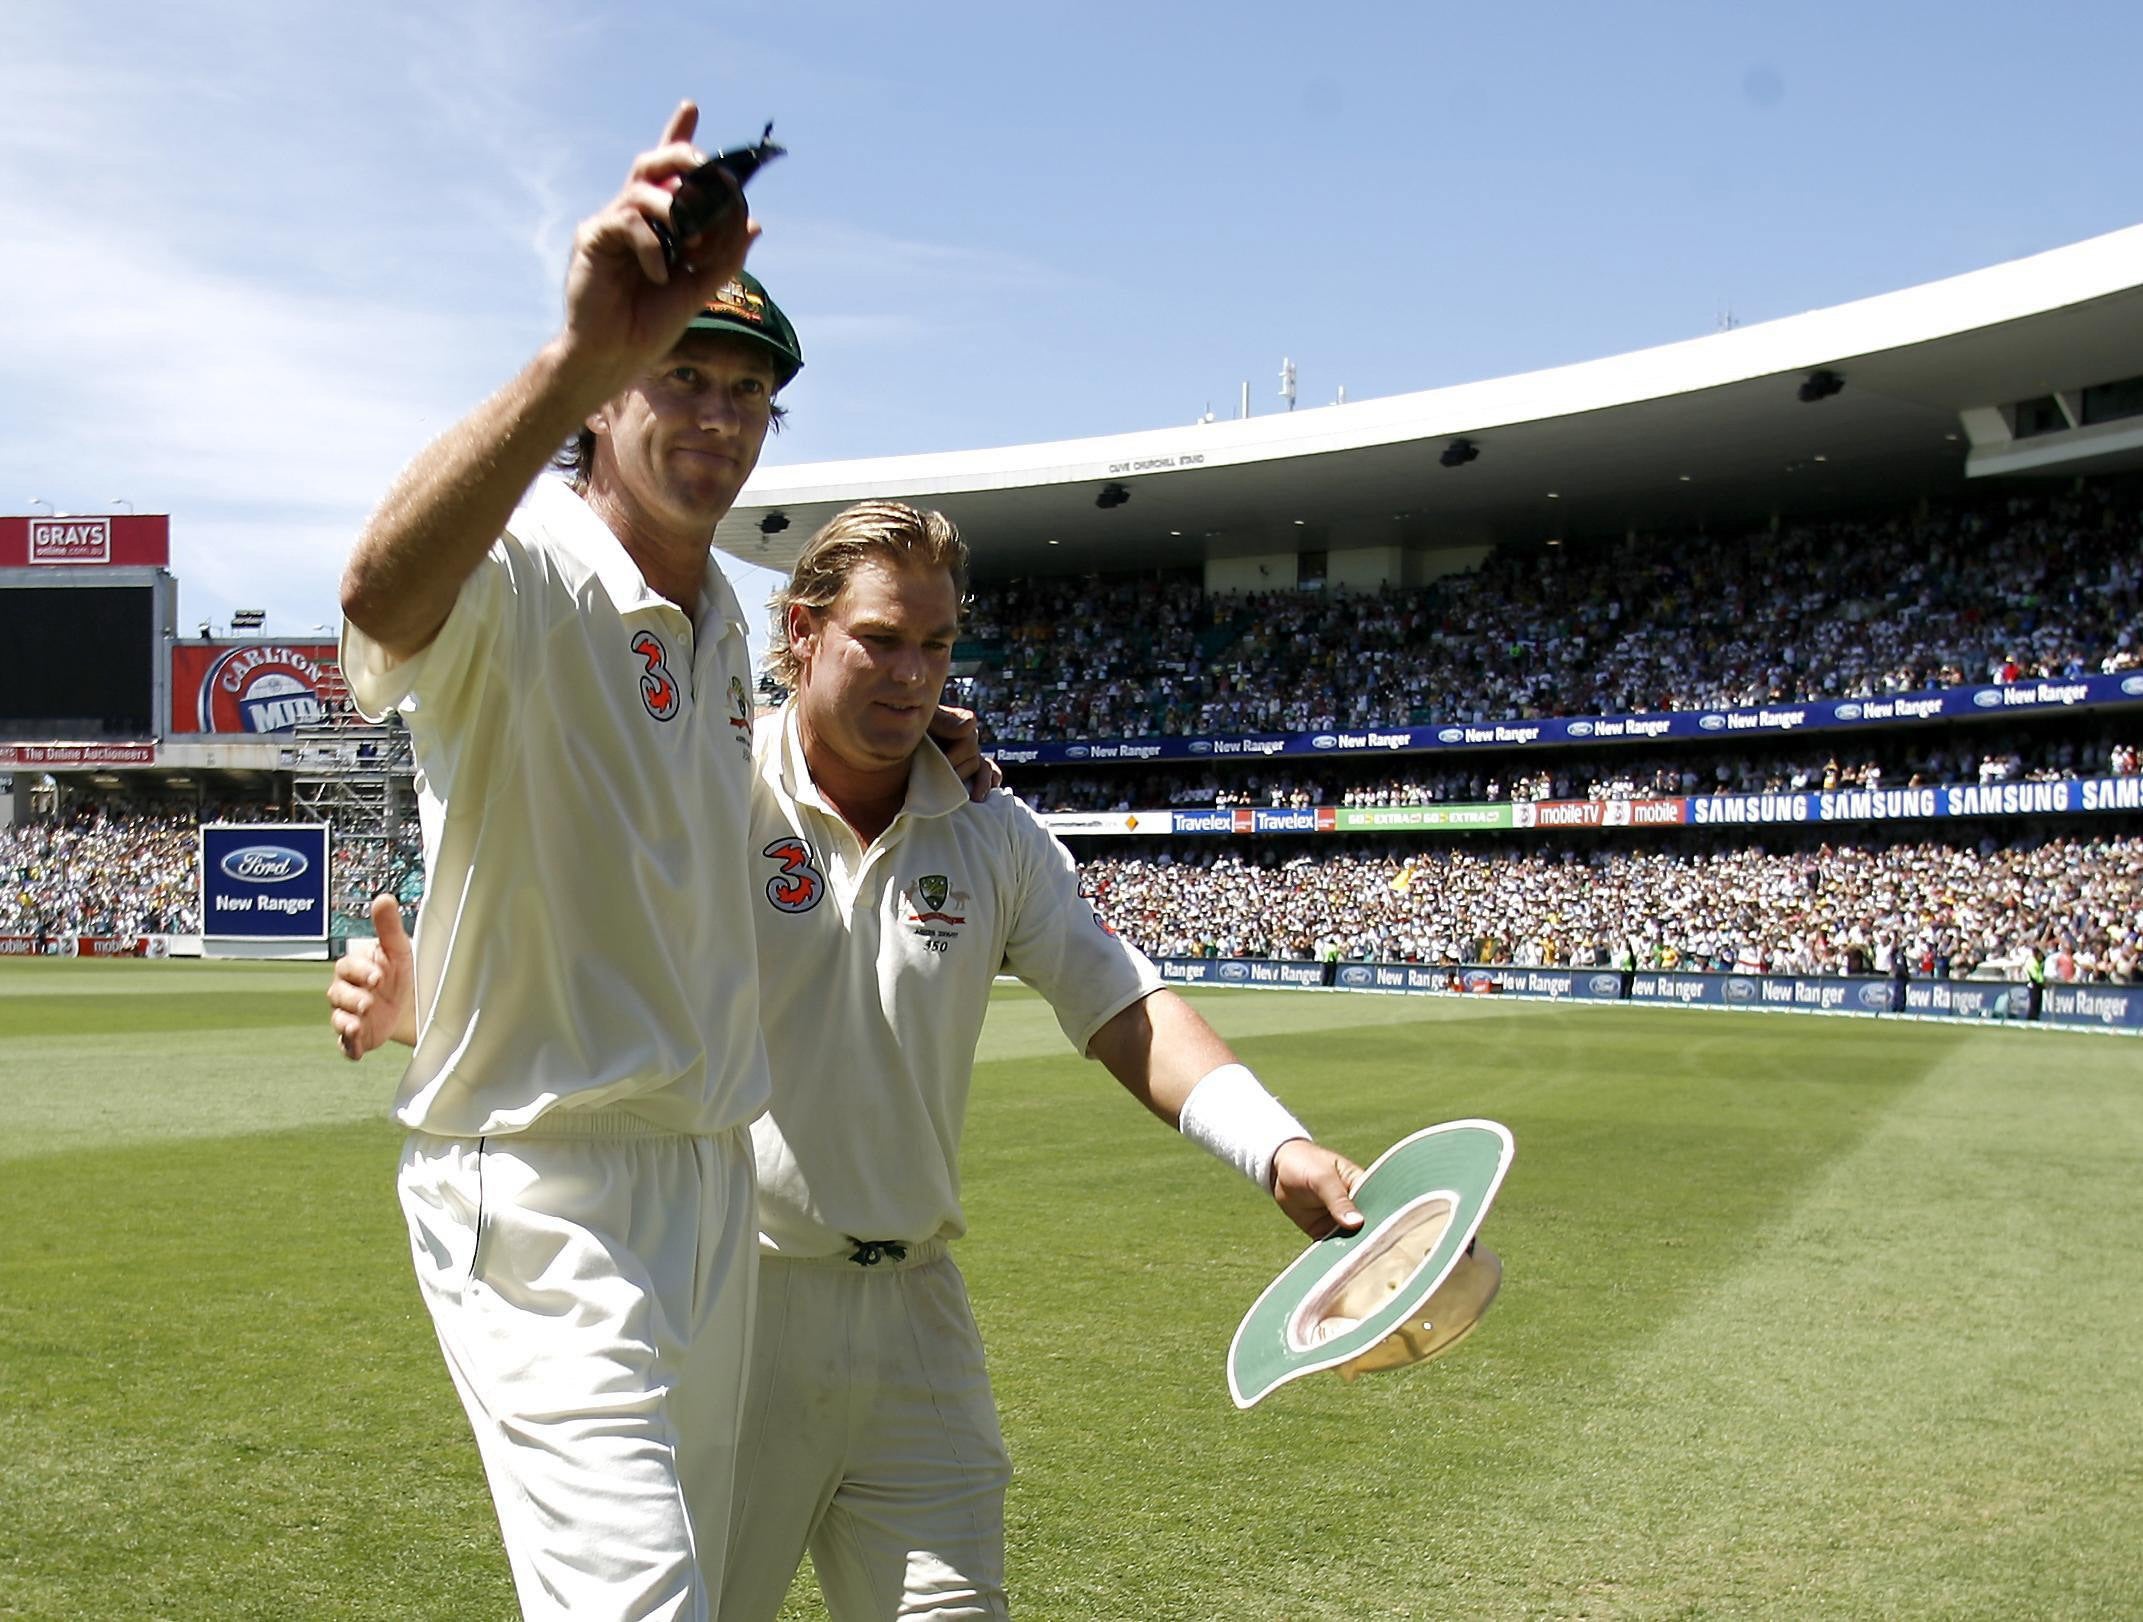 Australia’s Glenn McGrath and Shane Warne formed one of the best bowling partnerships in cricket history (Gareth Copley/PA)